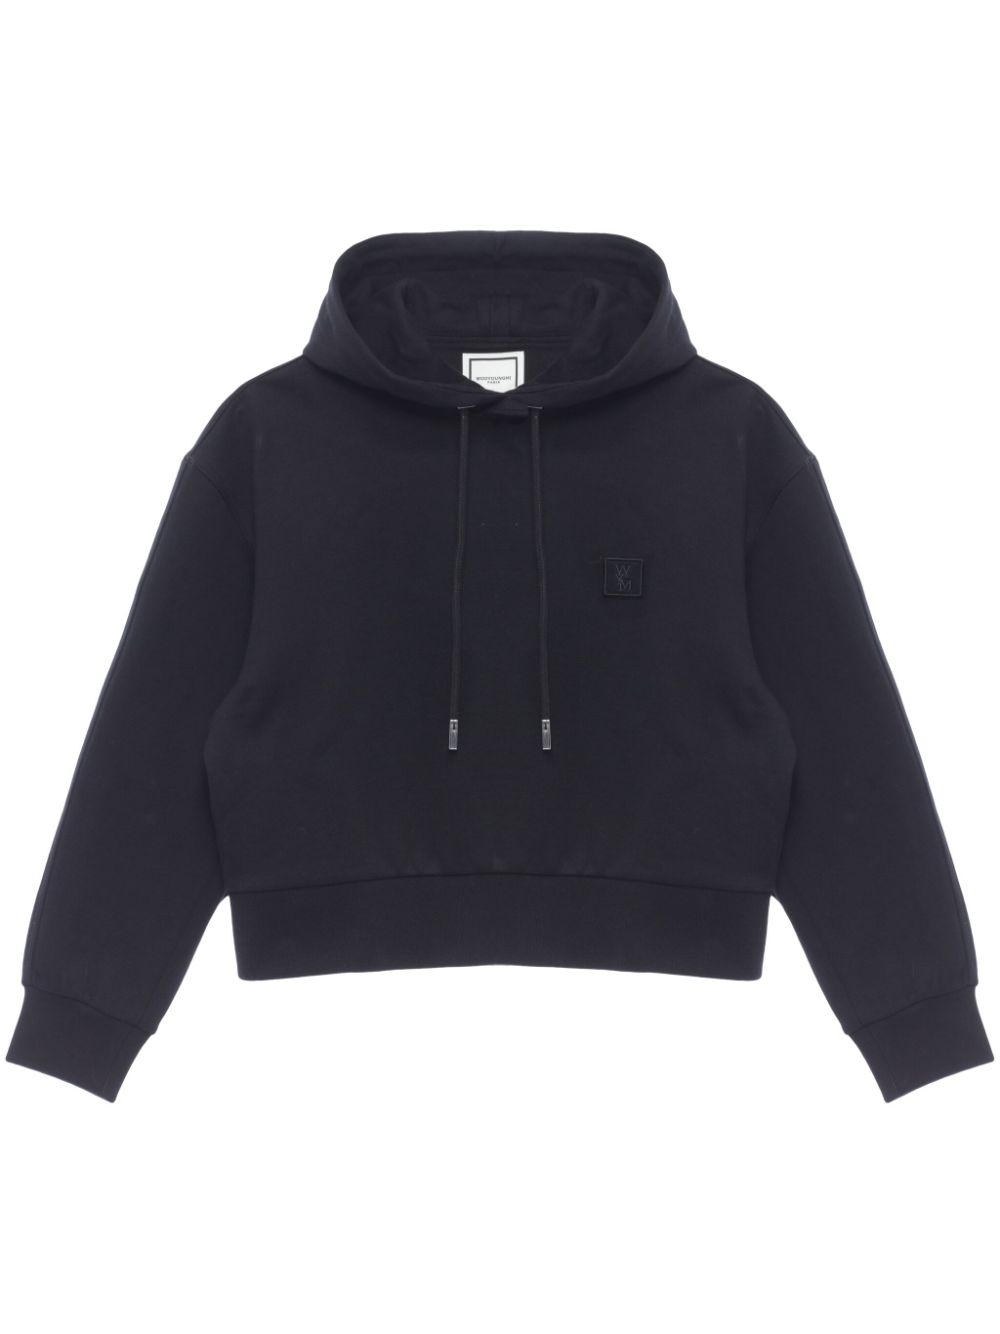 Wooyoungmi Letter Cotton Hoodie In Black